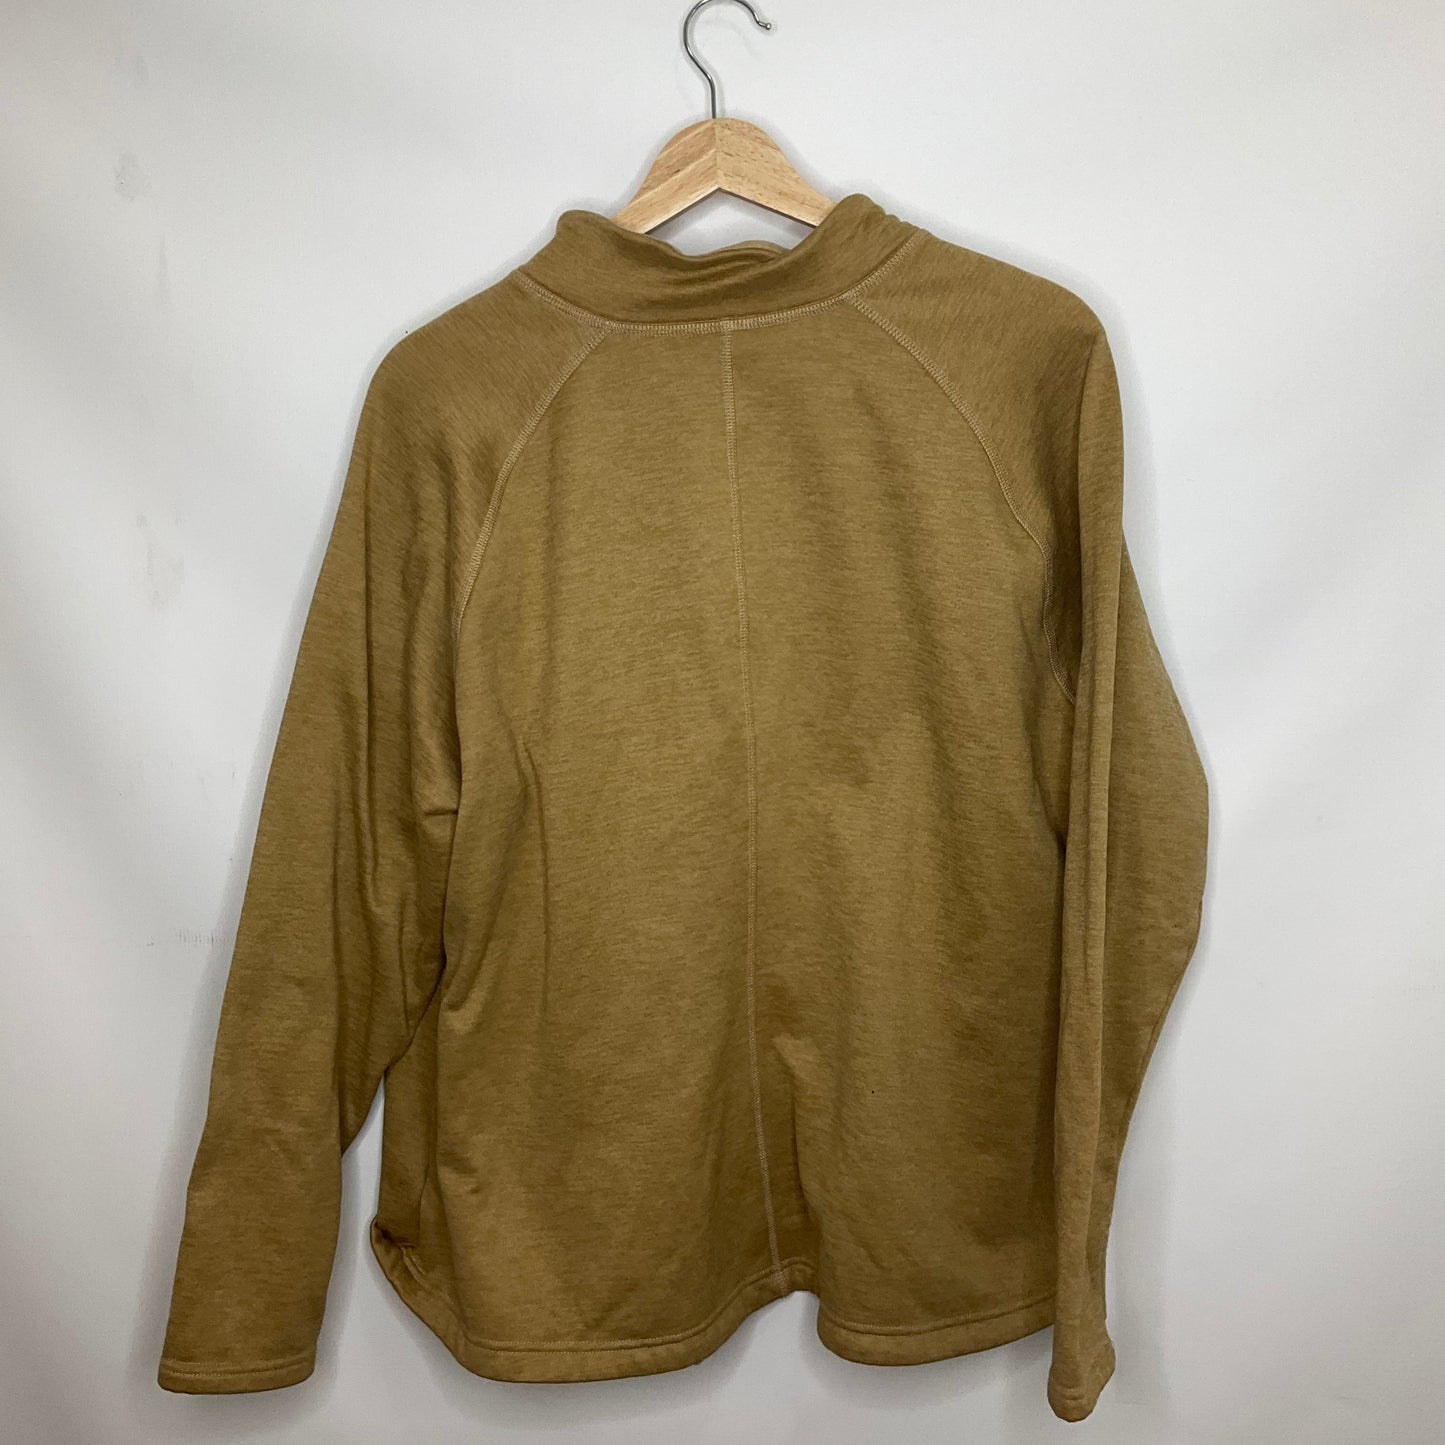 Brown Sweatshirt Collar The North Face, Size 2x